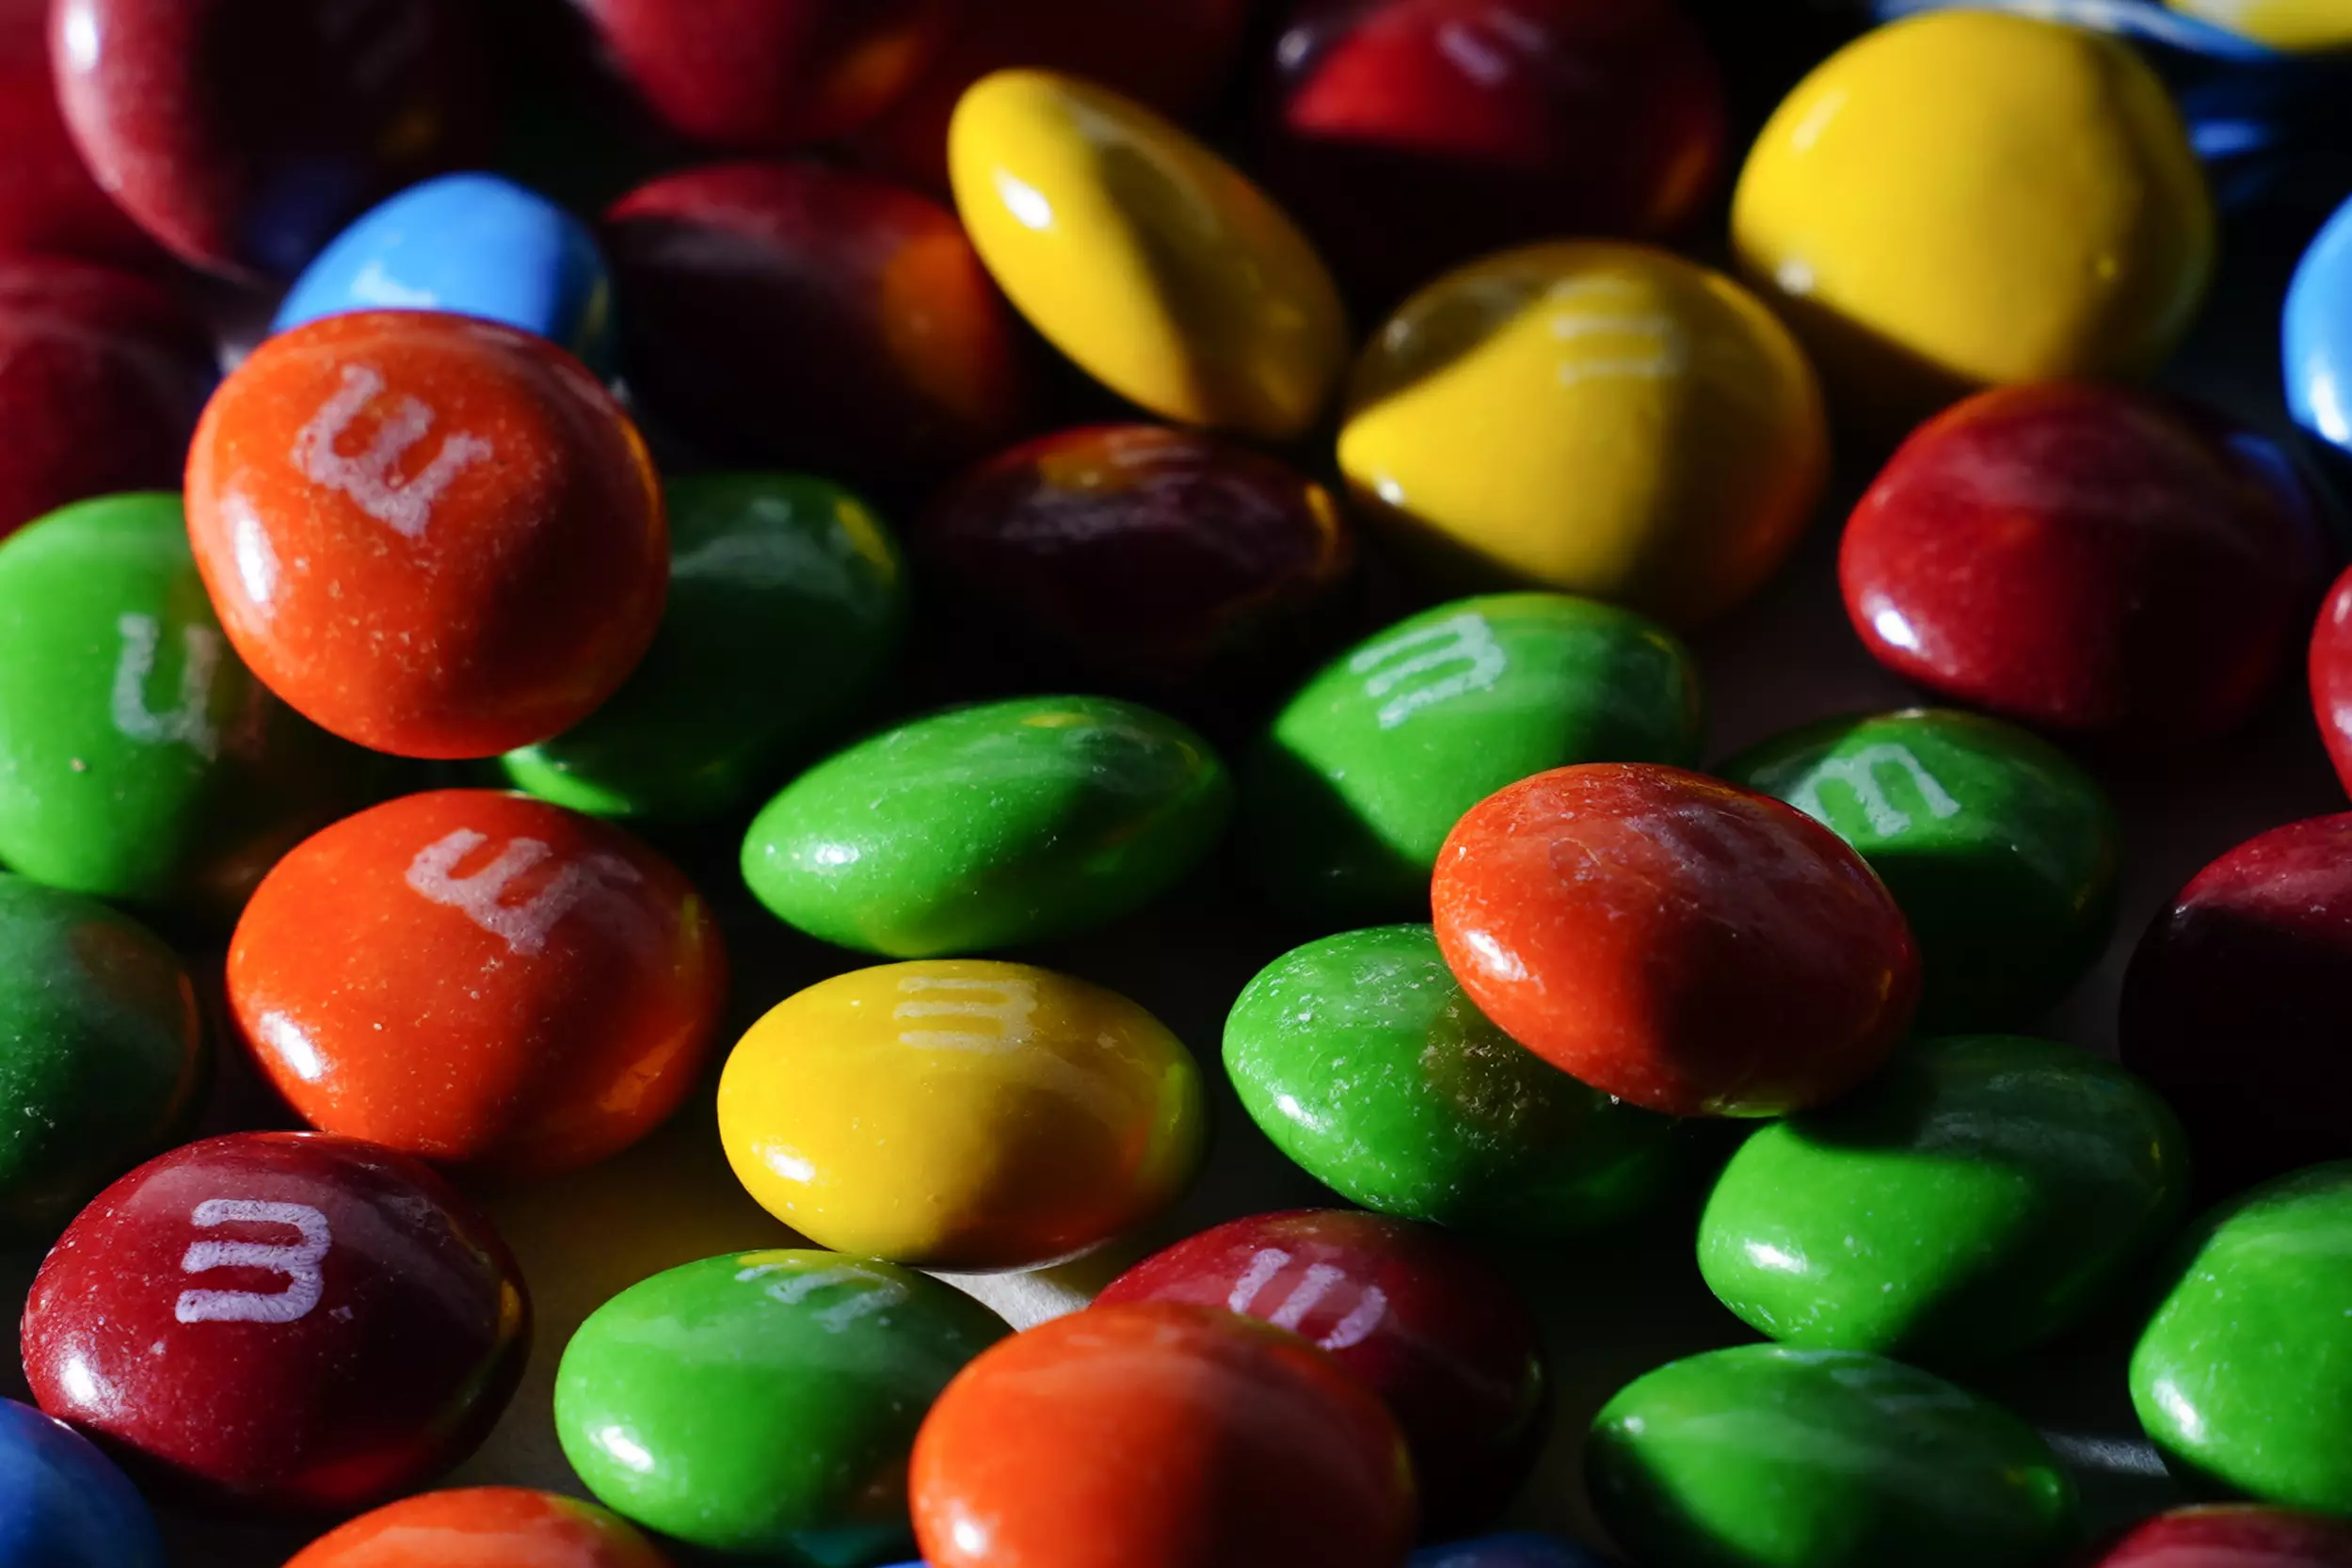 Contest! Win a Mountain of M&M's. Simply guess how many M&Ms are